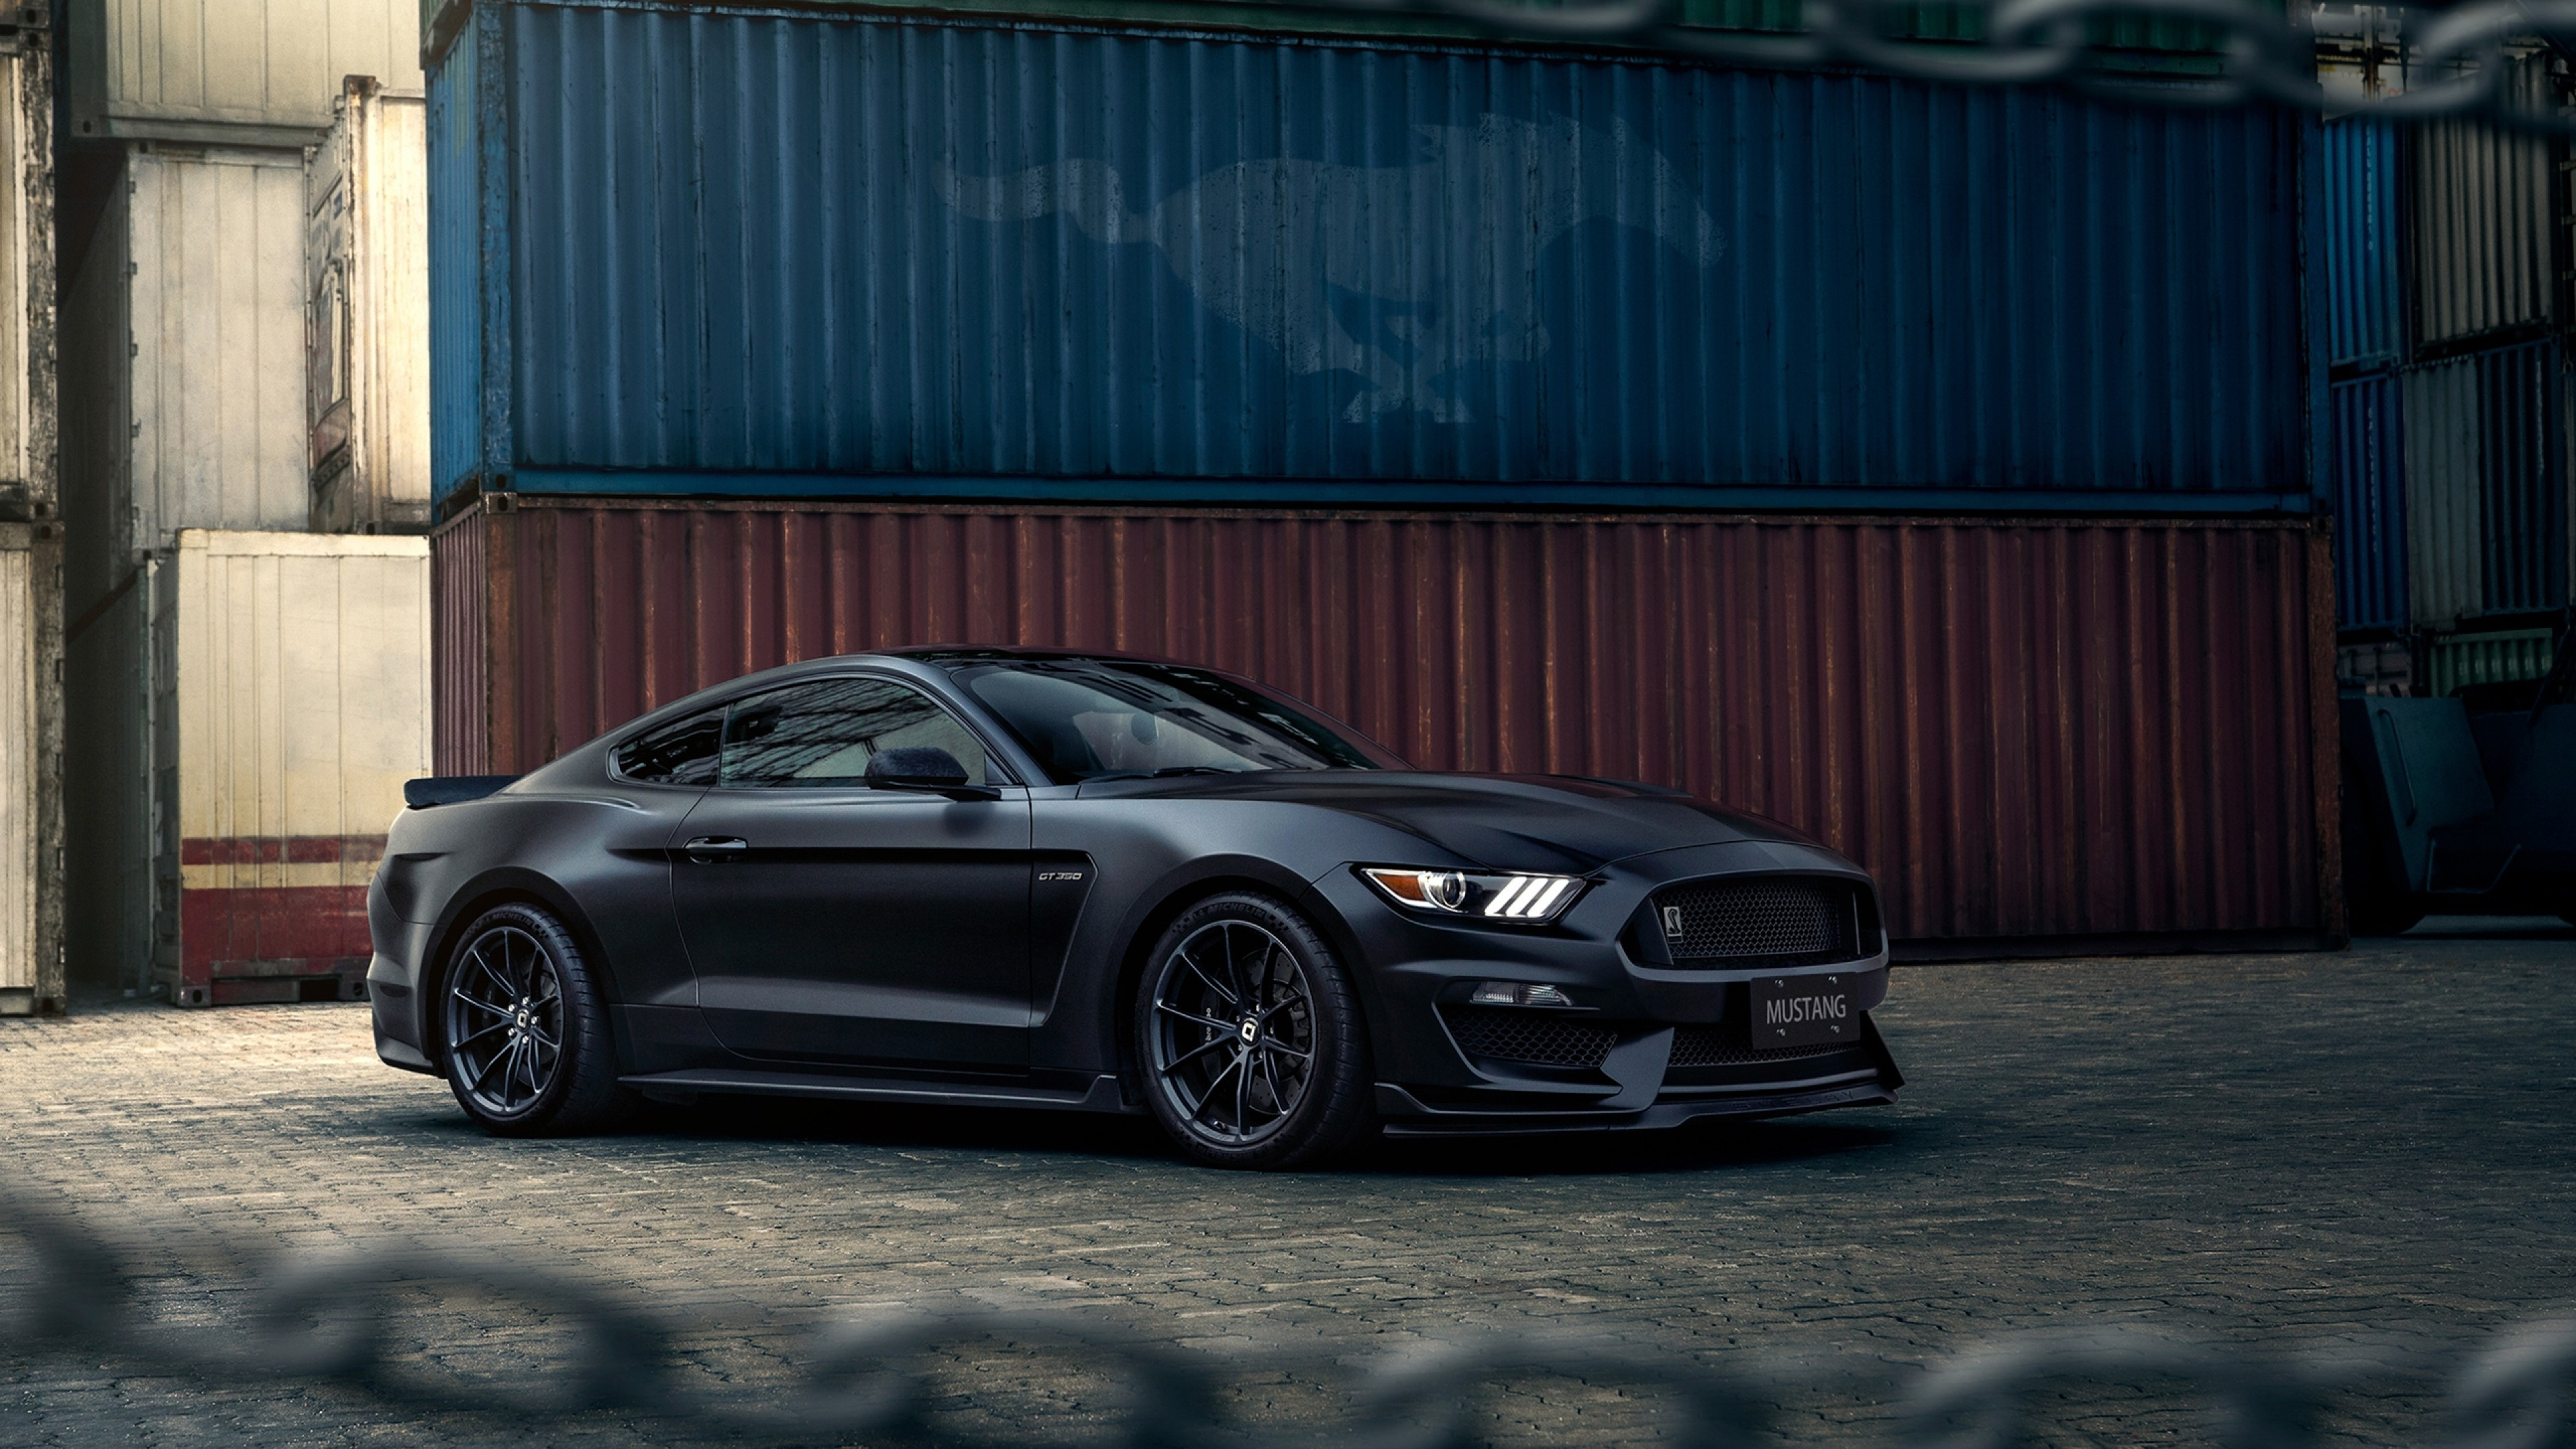 Download 3840x2160 Ford Mustang, Black, Side View, Containers, Muscle Cars Wallpaper for UHD TV